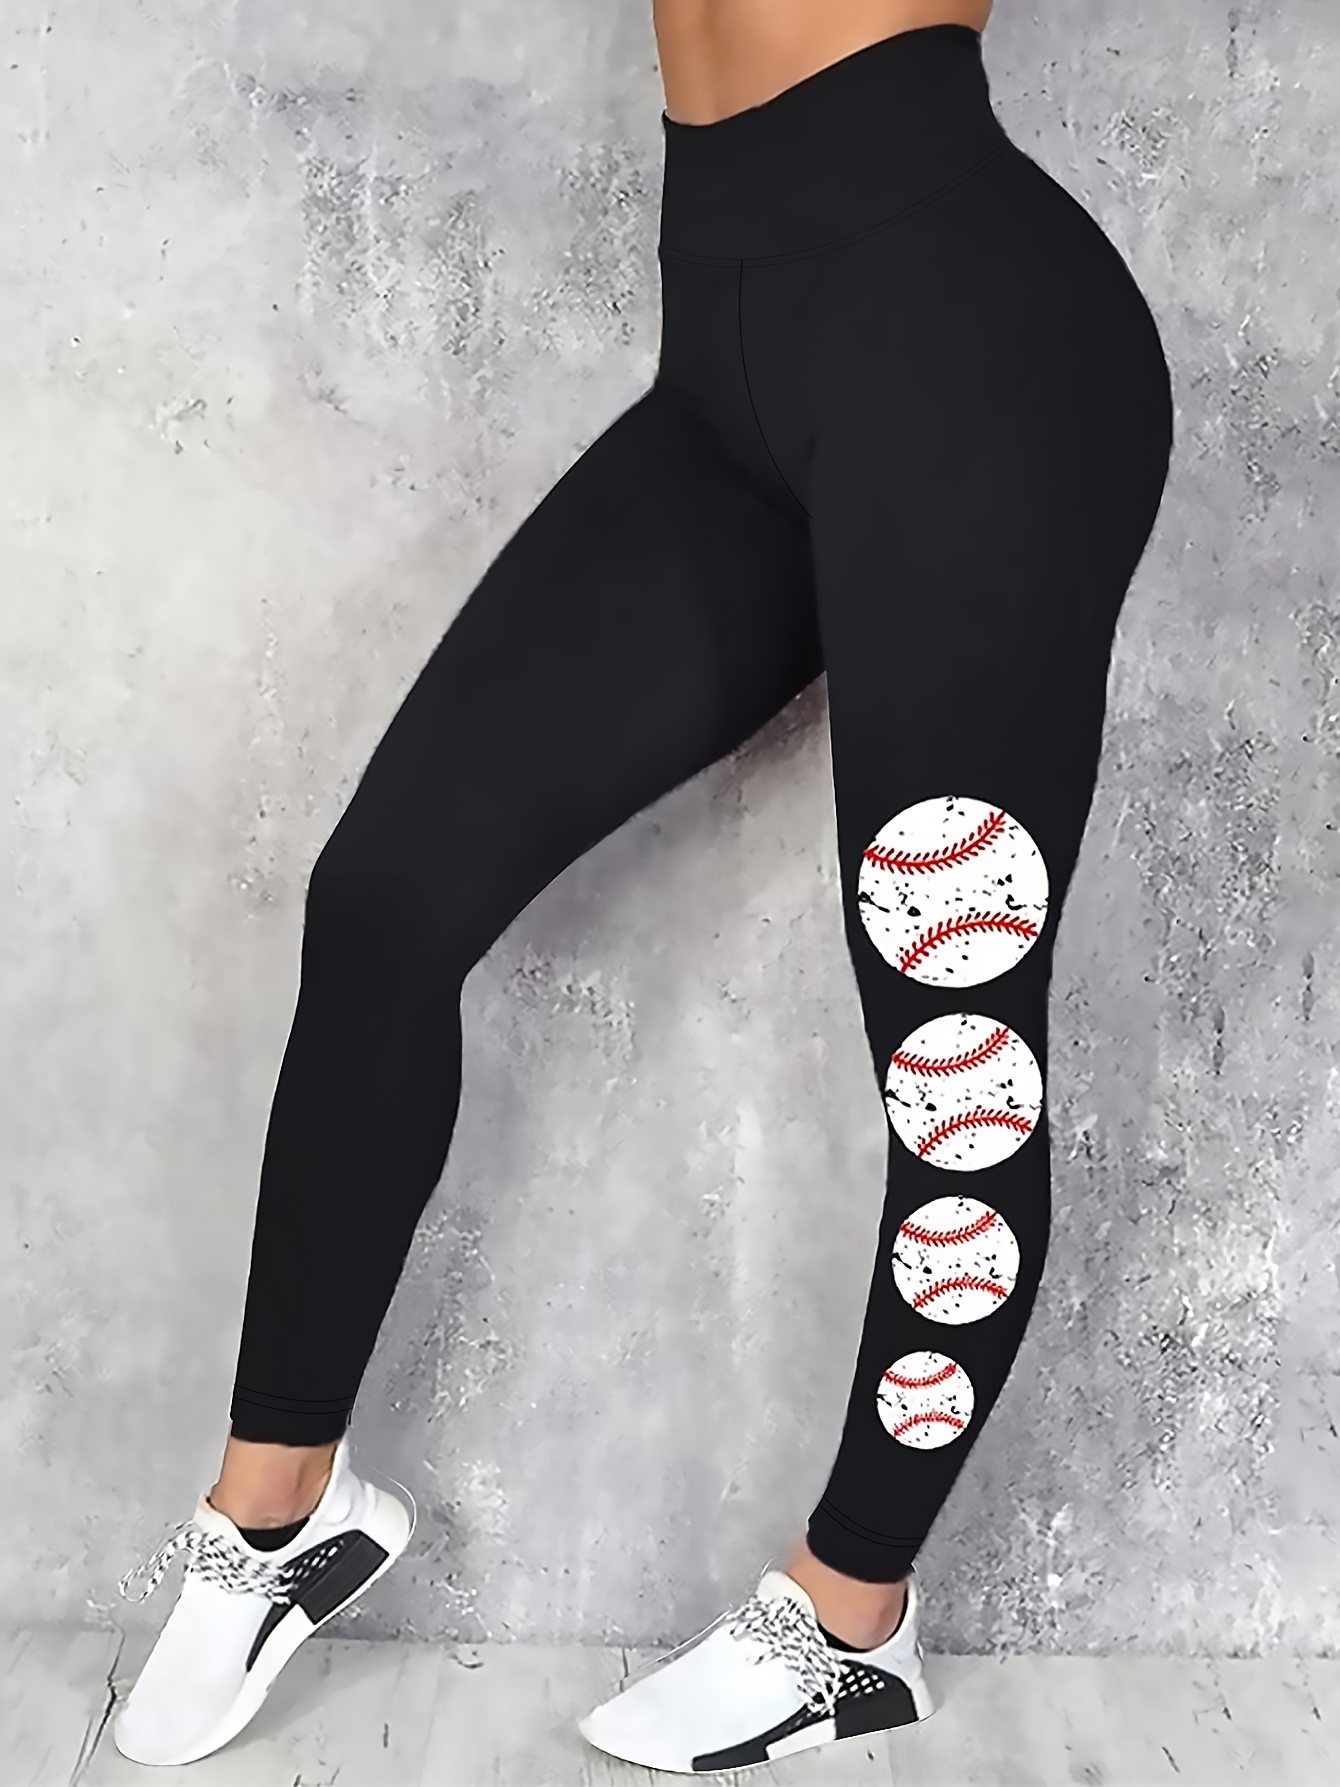 Honeycomb Yoga Leggings With Pocket, High Stretch Sports Running Tight  Pants, Women's Activewear